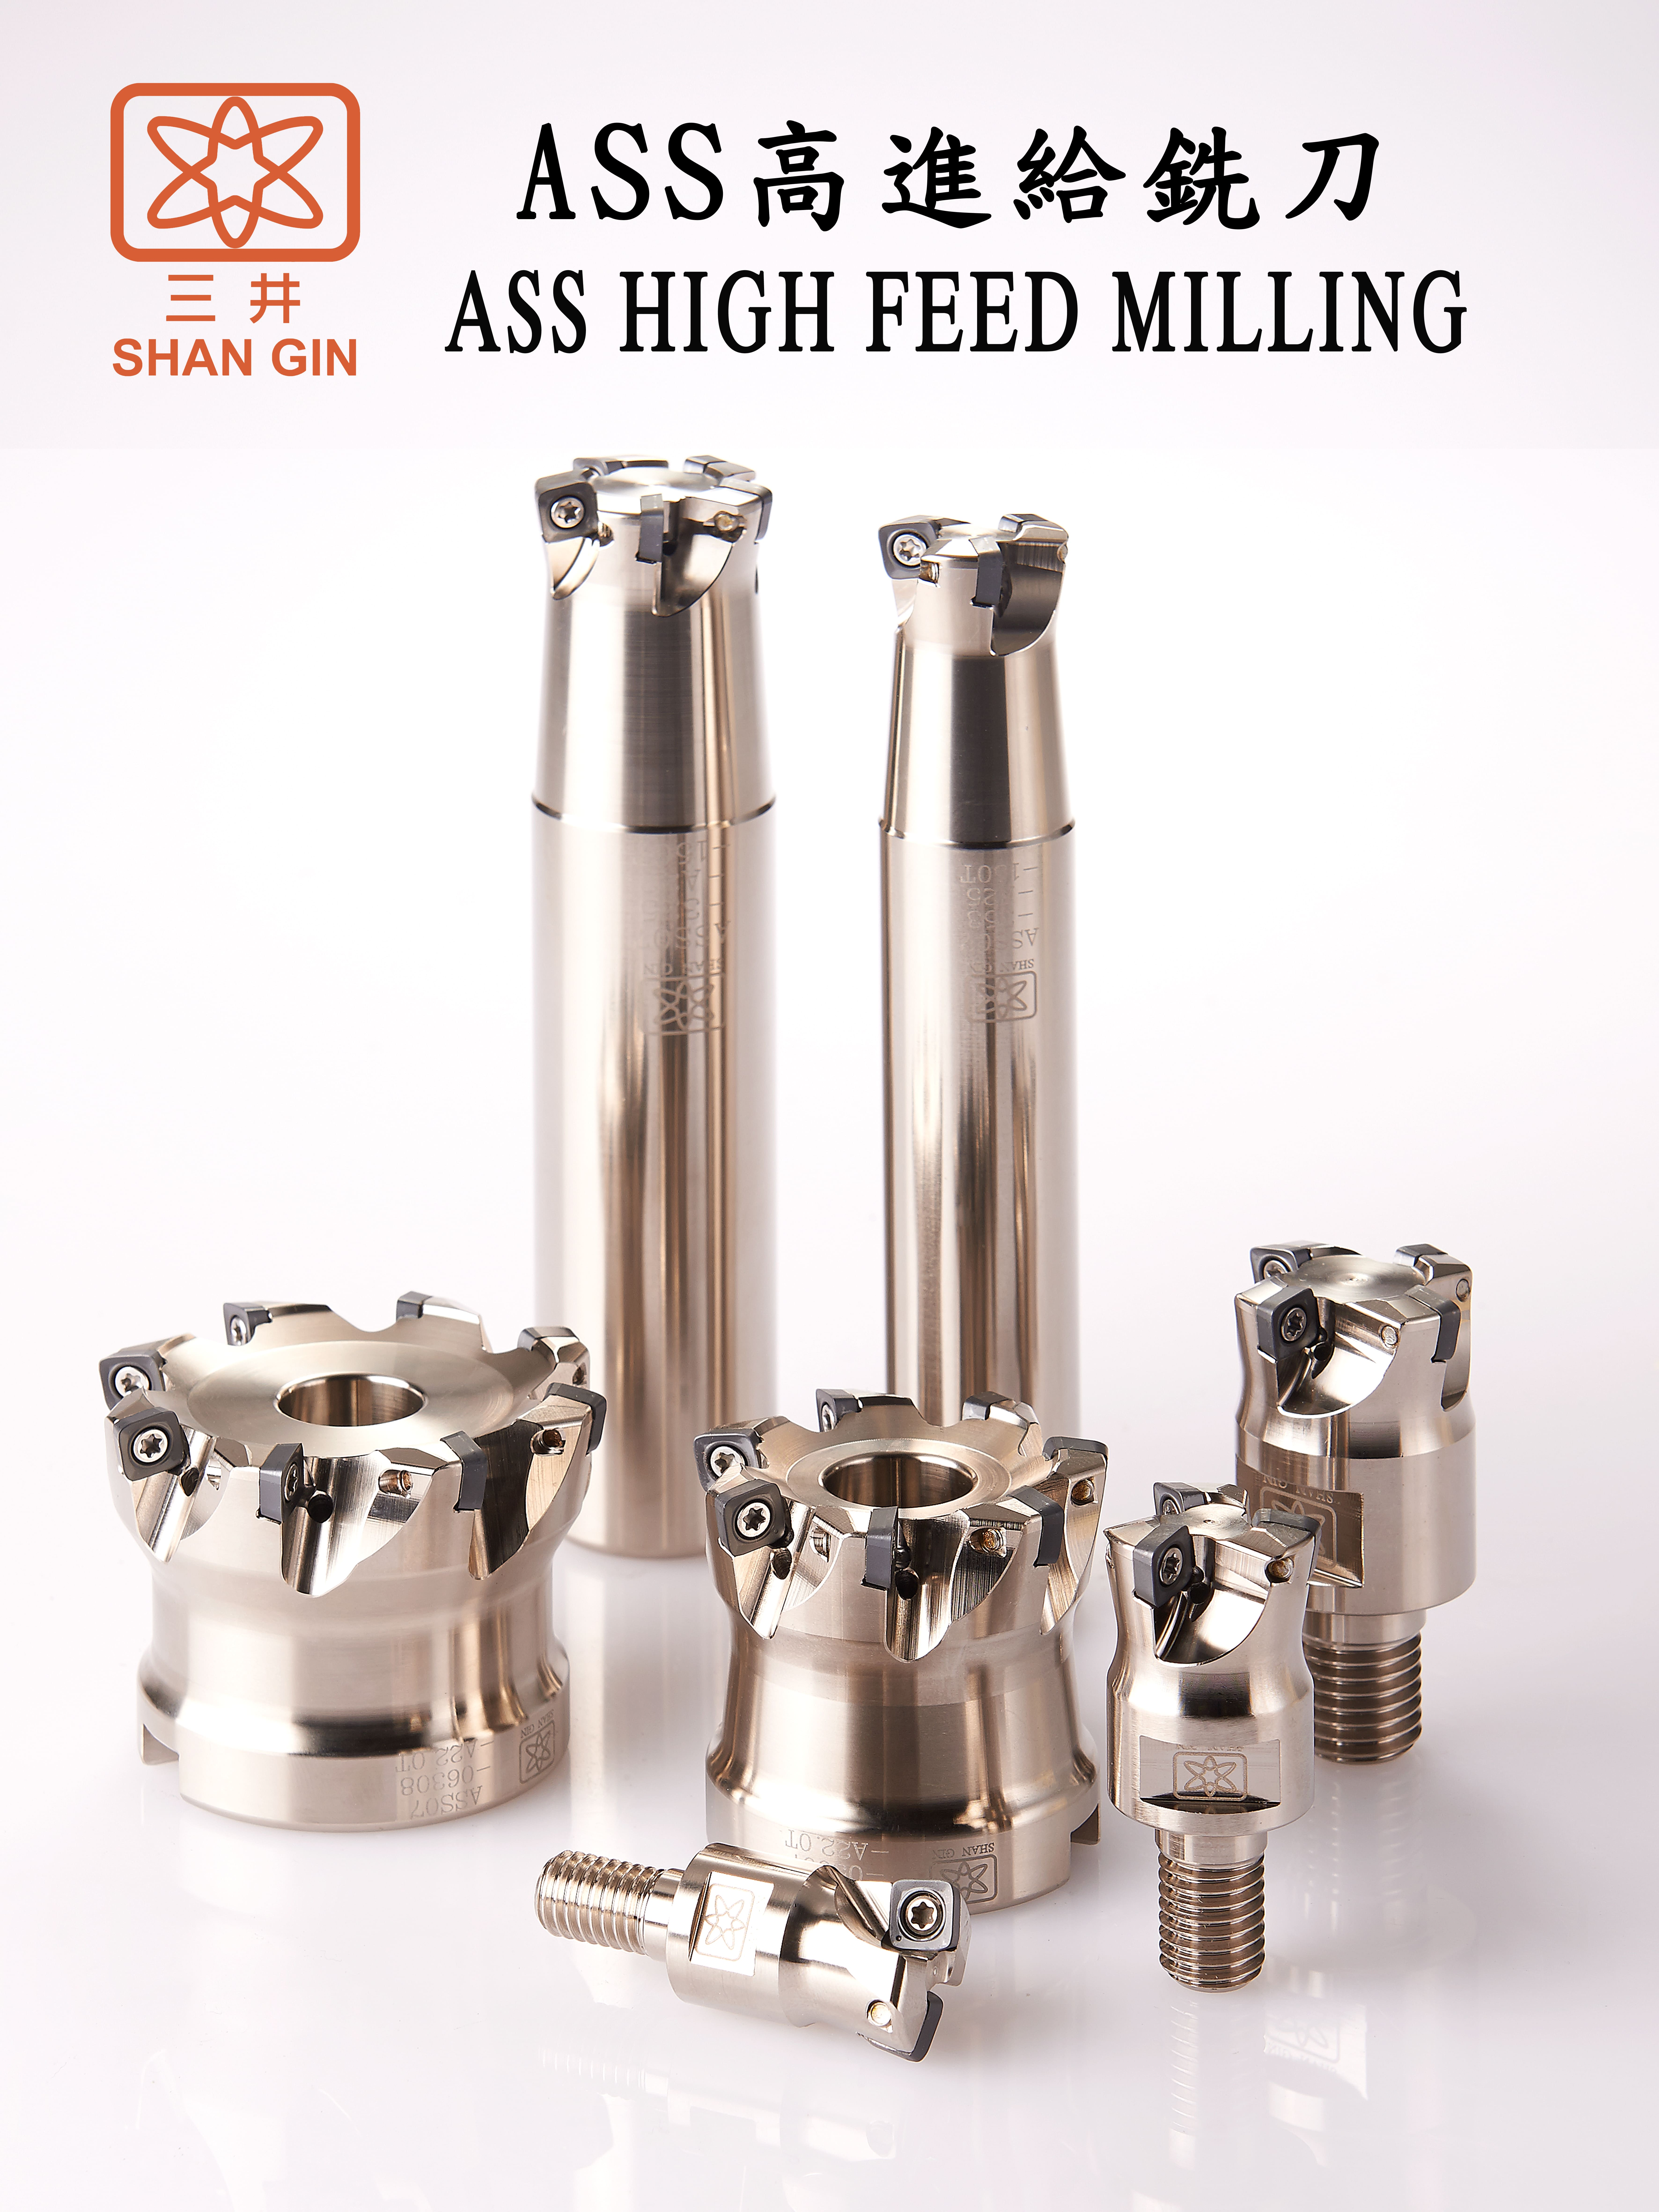 Catalog|ASS HIGH FEED MILLING